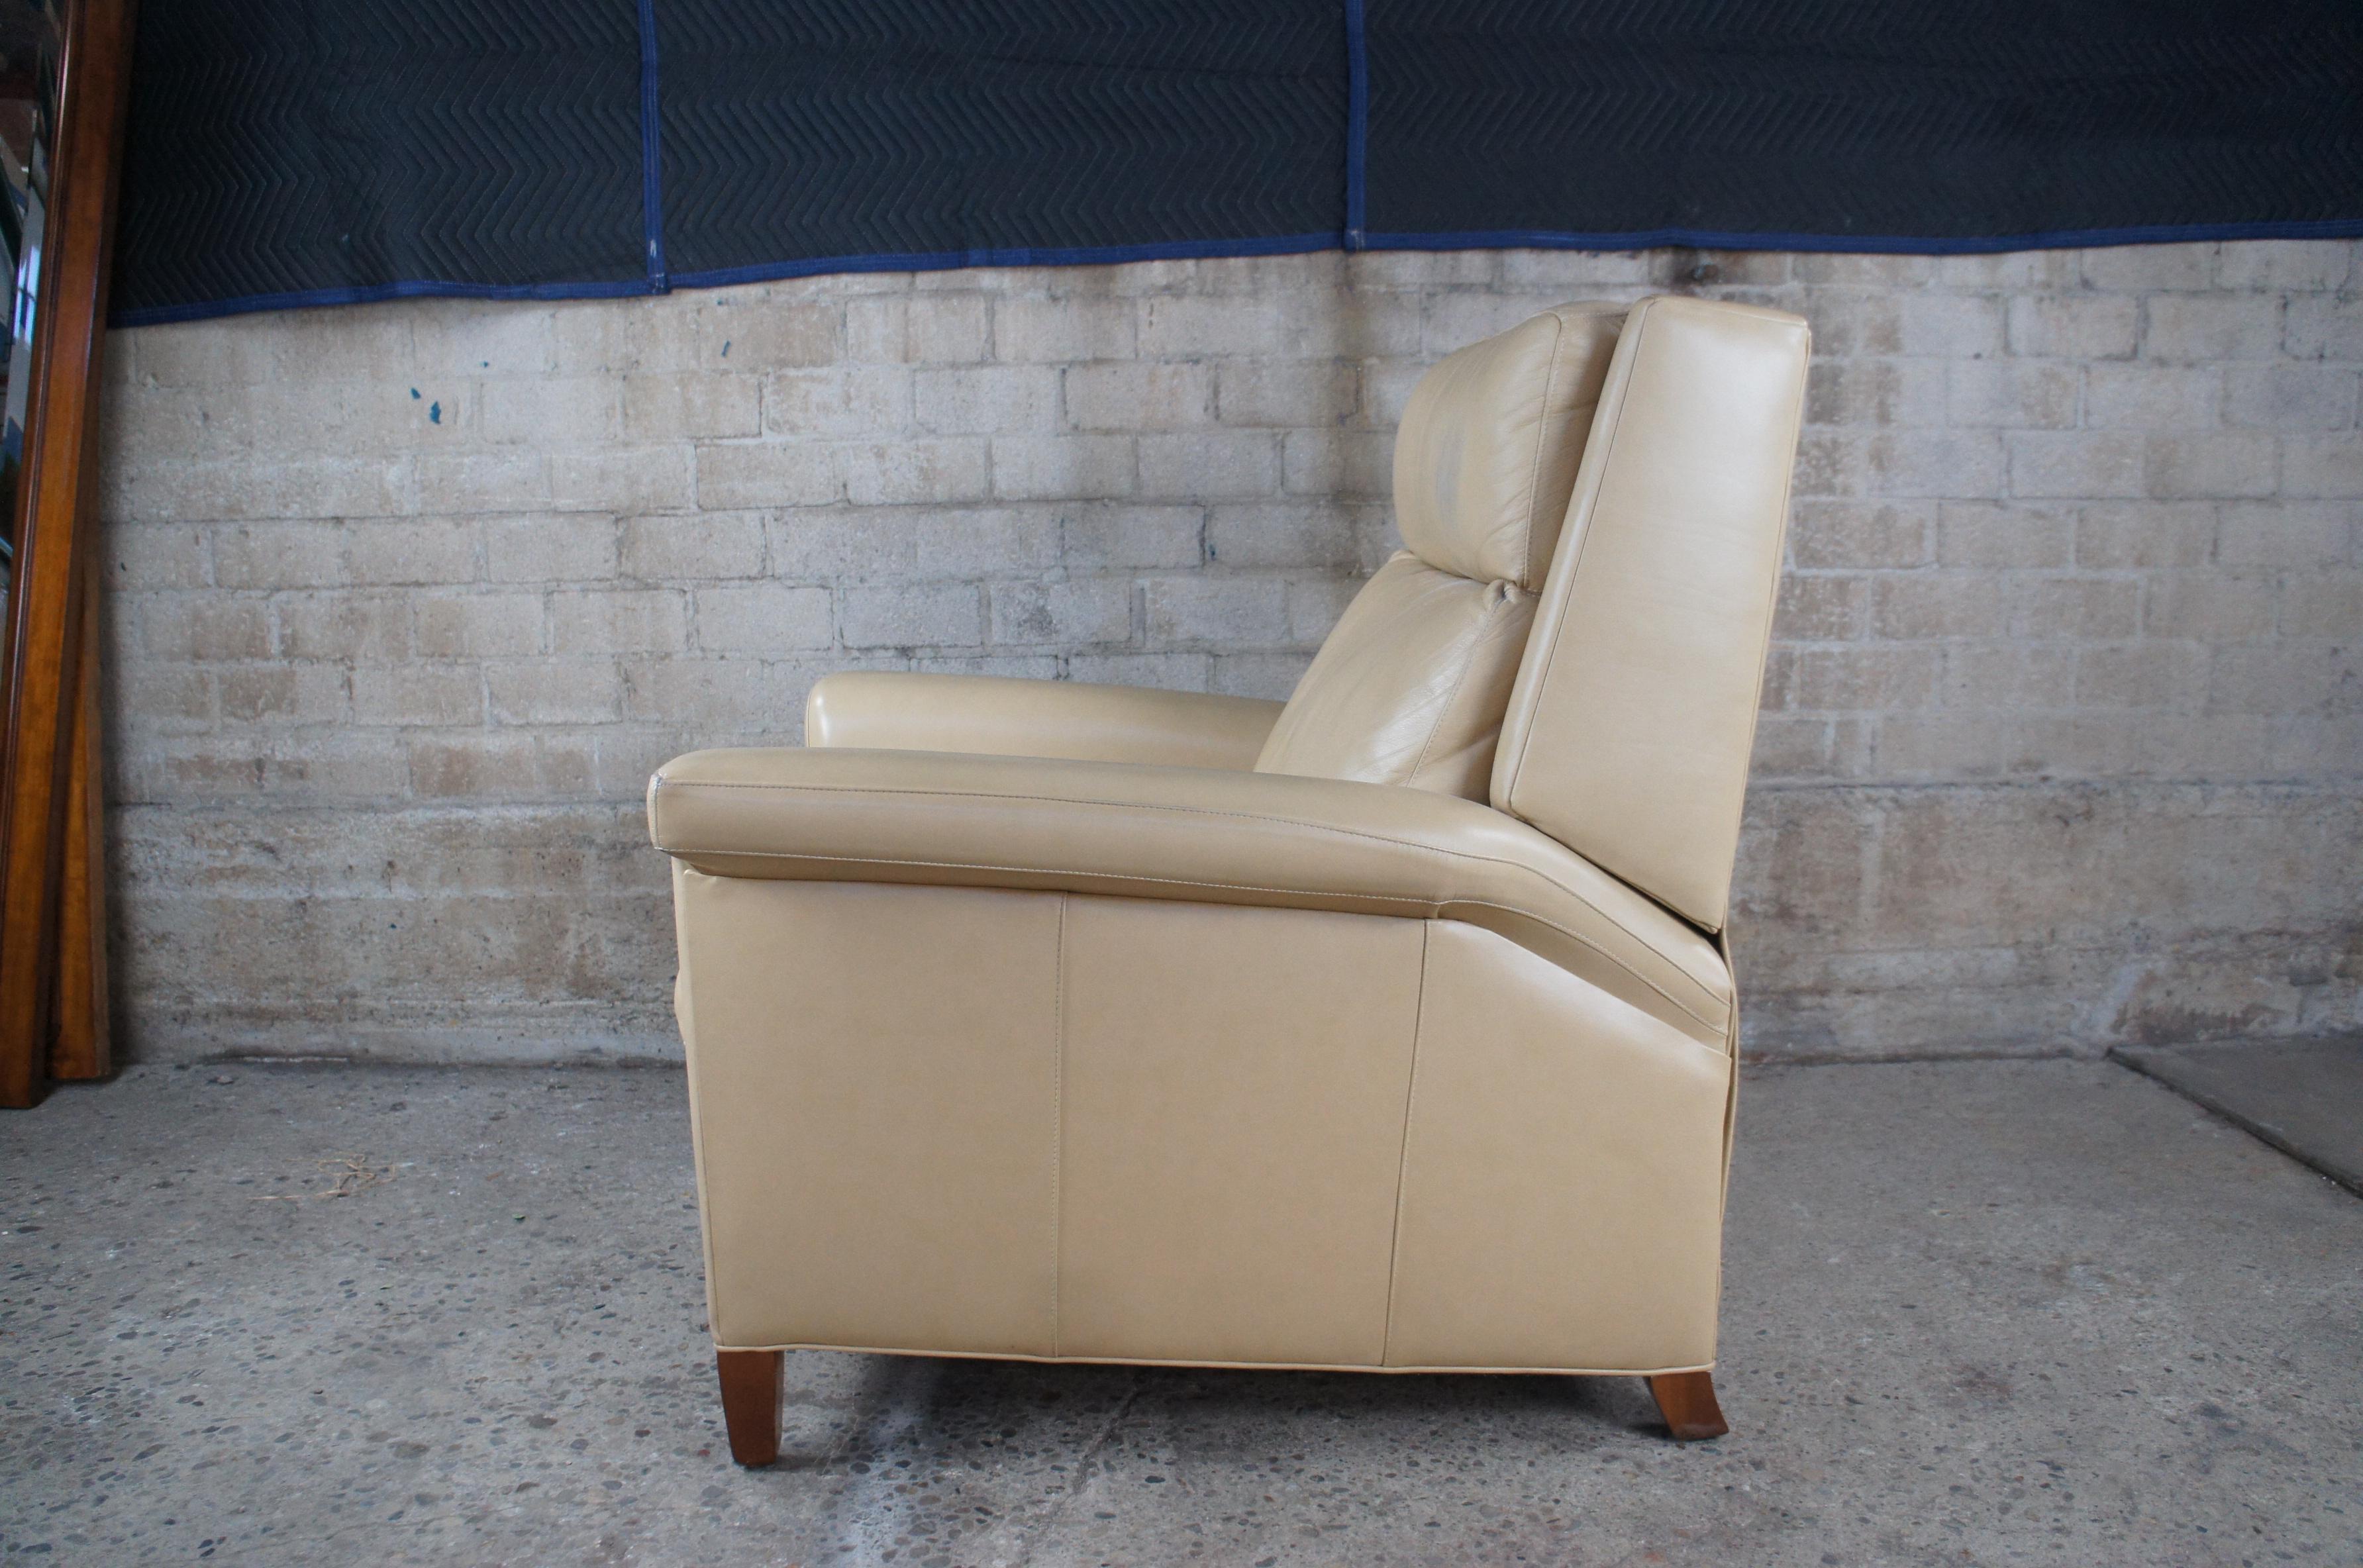 Hancock & Moore Traditional Leather Ghent Push Back Recliner Lounge Chair Cream 2